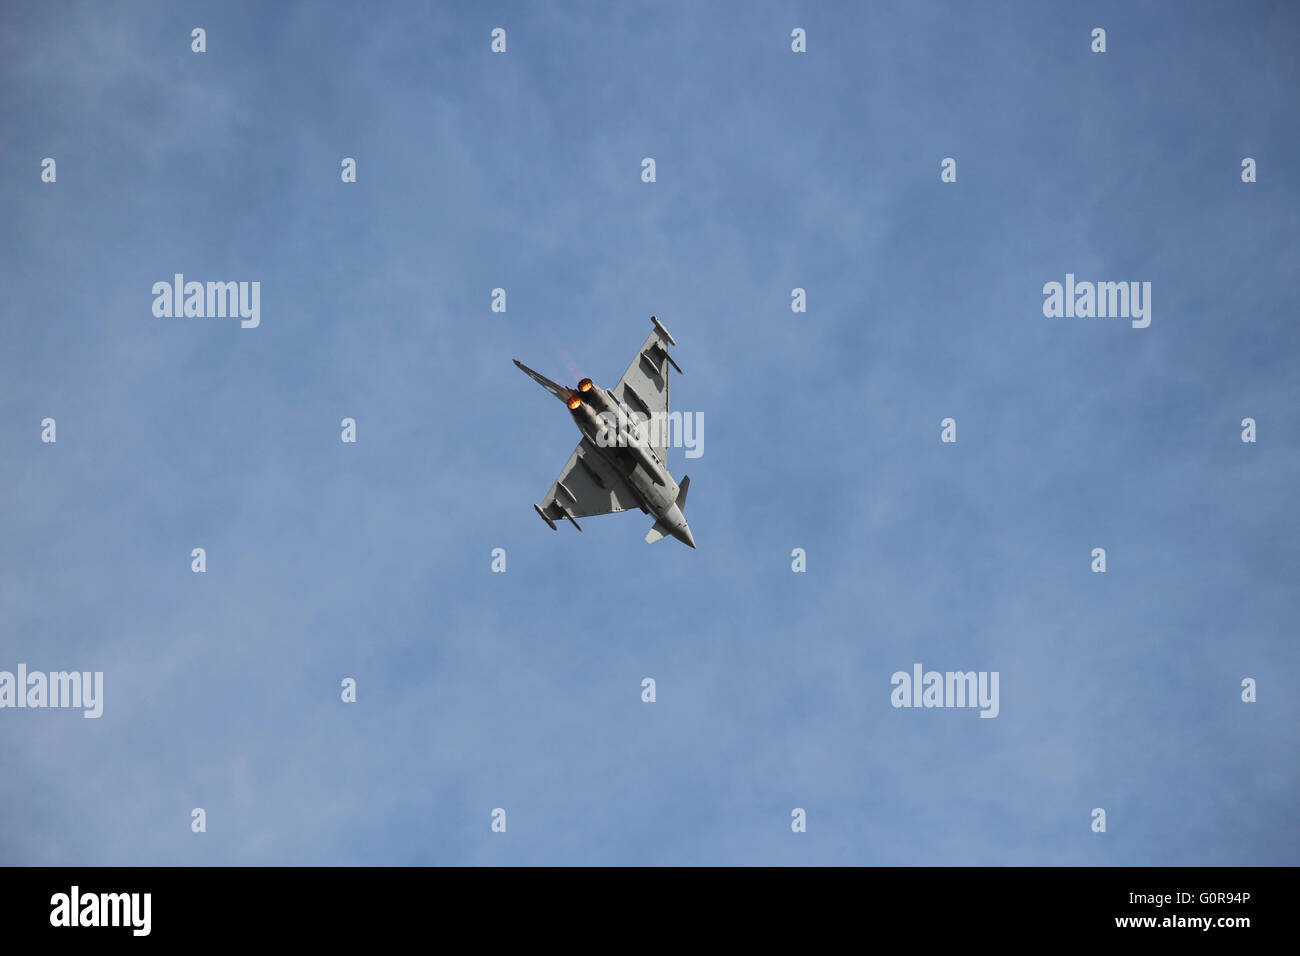 The Eurofighter Typhoon completing a display against a blue sky Stock Photo